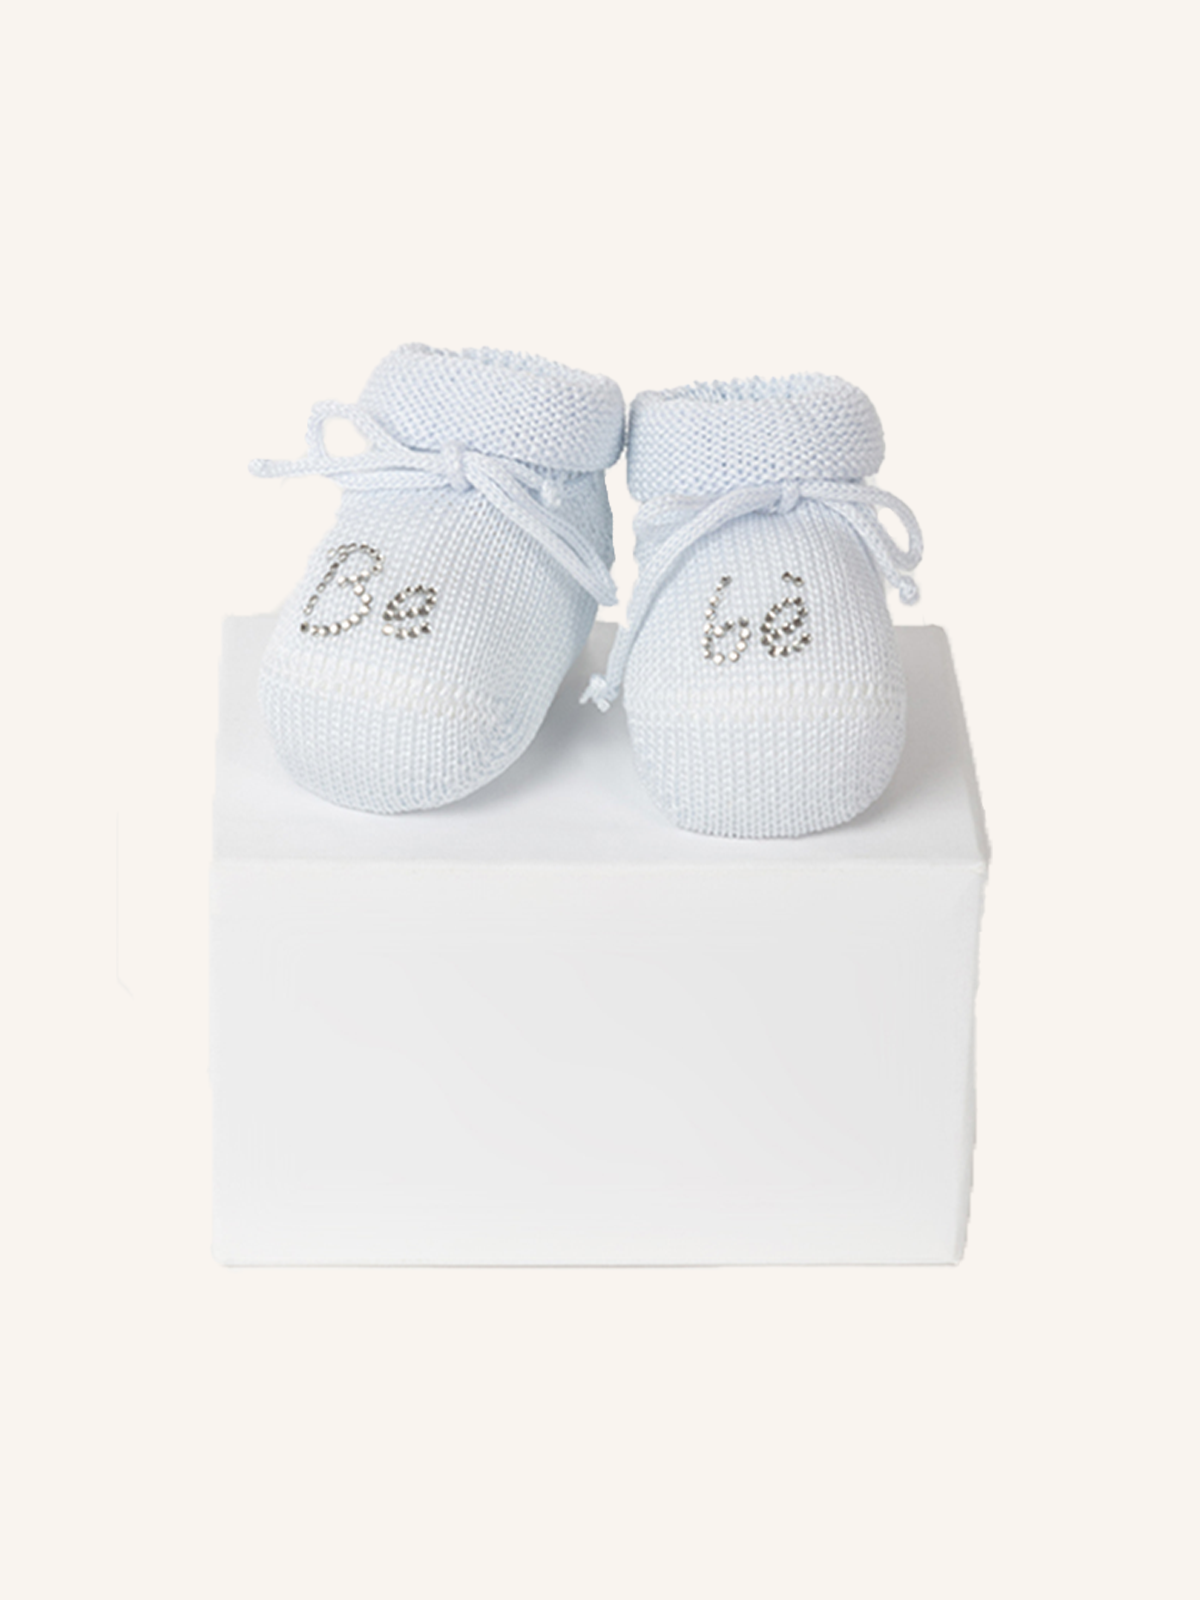 Slipper in Cotton with 'Bebè' Written in Rhinestones for Newborn | Solid Color | Pack of 1 Pair | 41930